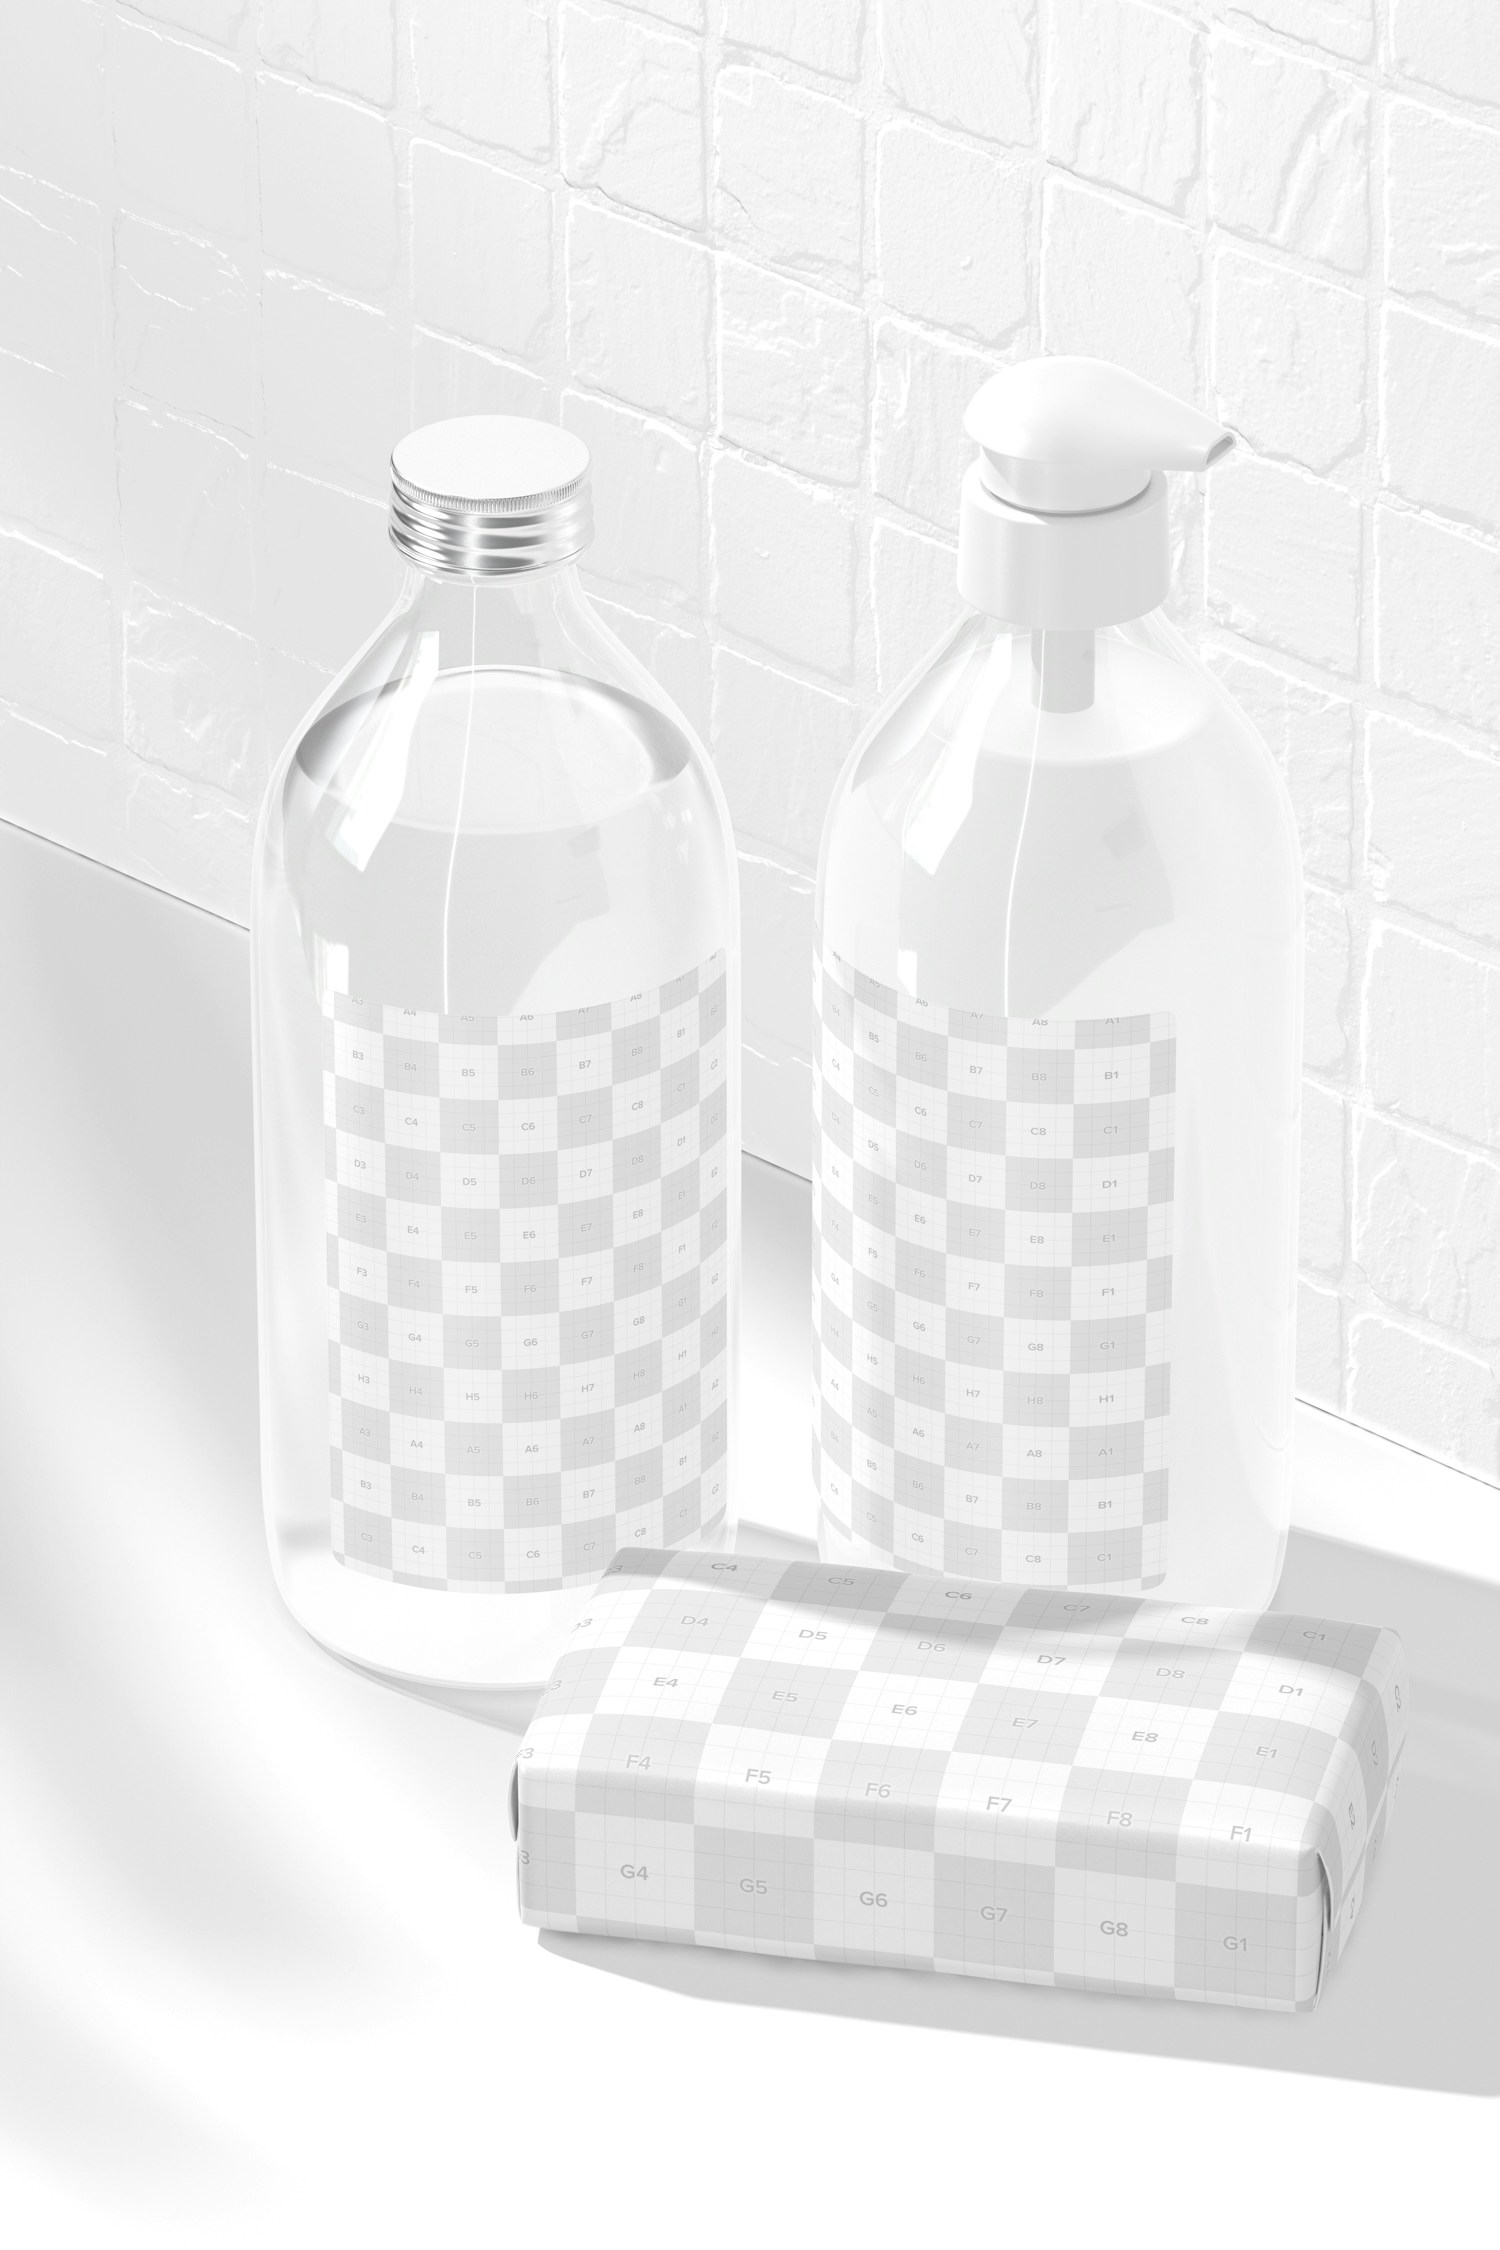 Bath and Body Products Scene Mockup, Perspective 02